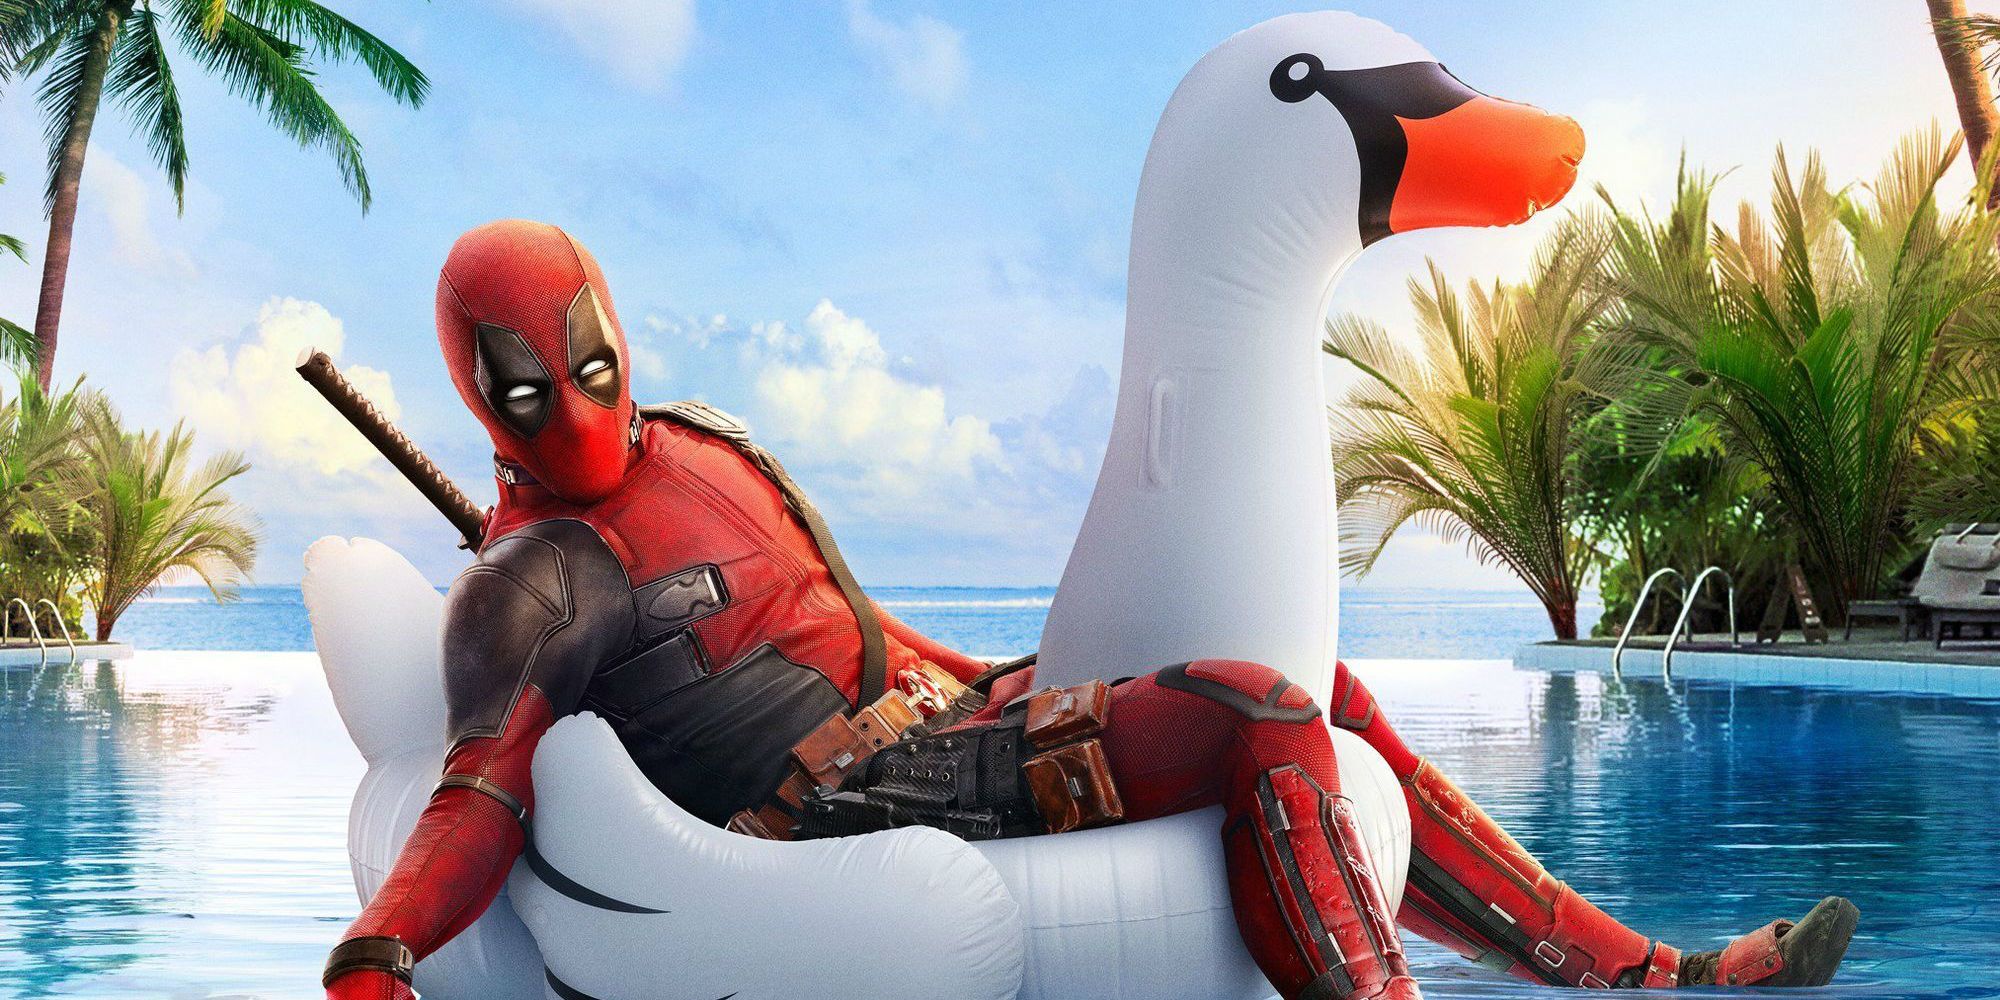 Deadpool 2 Is Full Of Cameos - Here Are The Best Ones